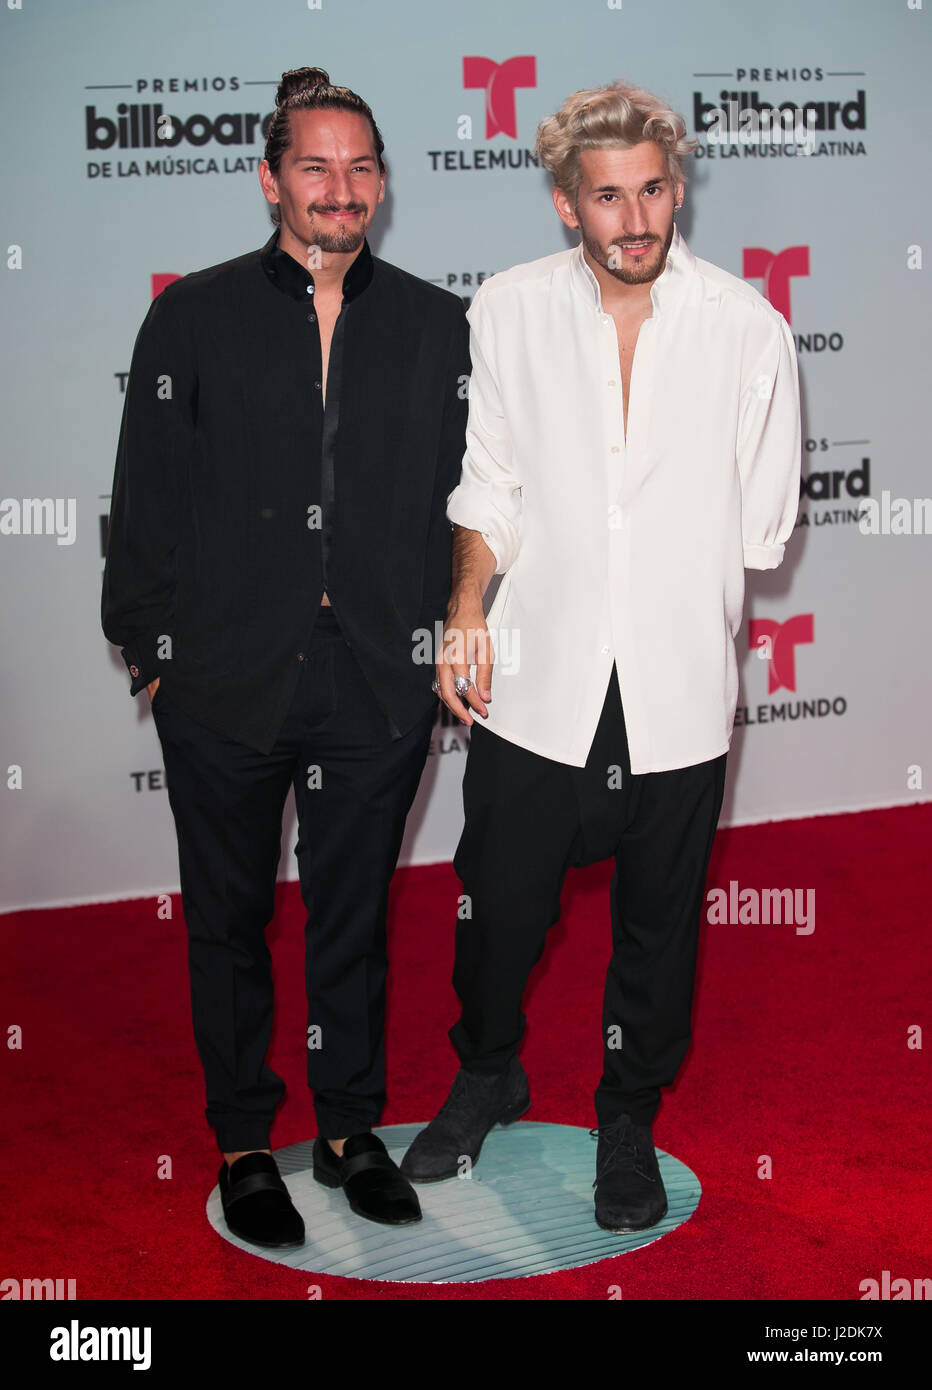 Coral Gables, FL, USA. 27th Apr, 2017. Mau y Ricky attends the Billboard Latin Music Awards at Watsco Center in Coral Gables, Florida on April 15, 2017. Credit: Aaron Gilbert/Media Punch/Alamy Live News/Alamy Live News Stock Photo